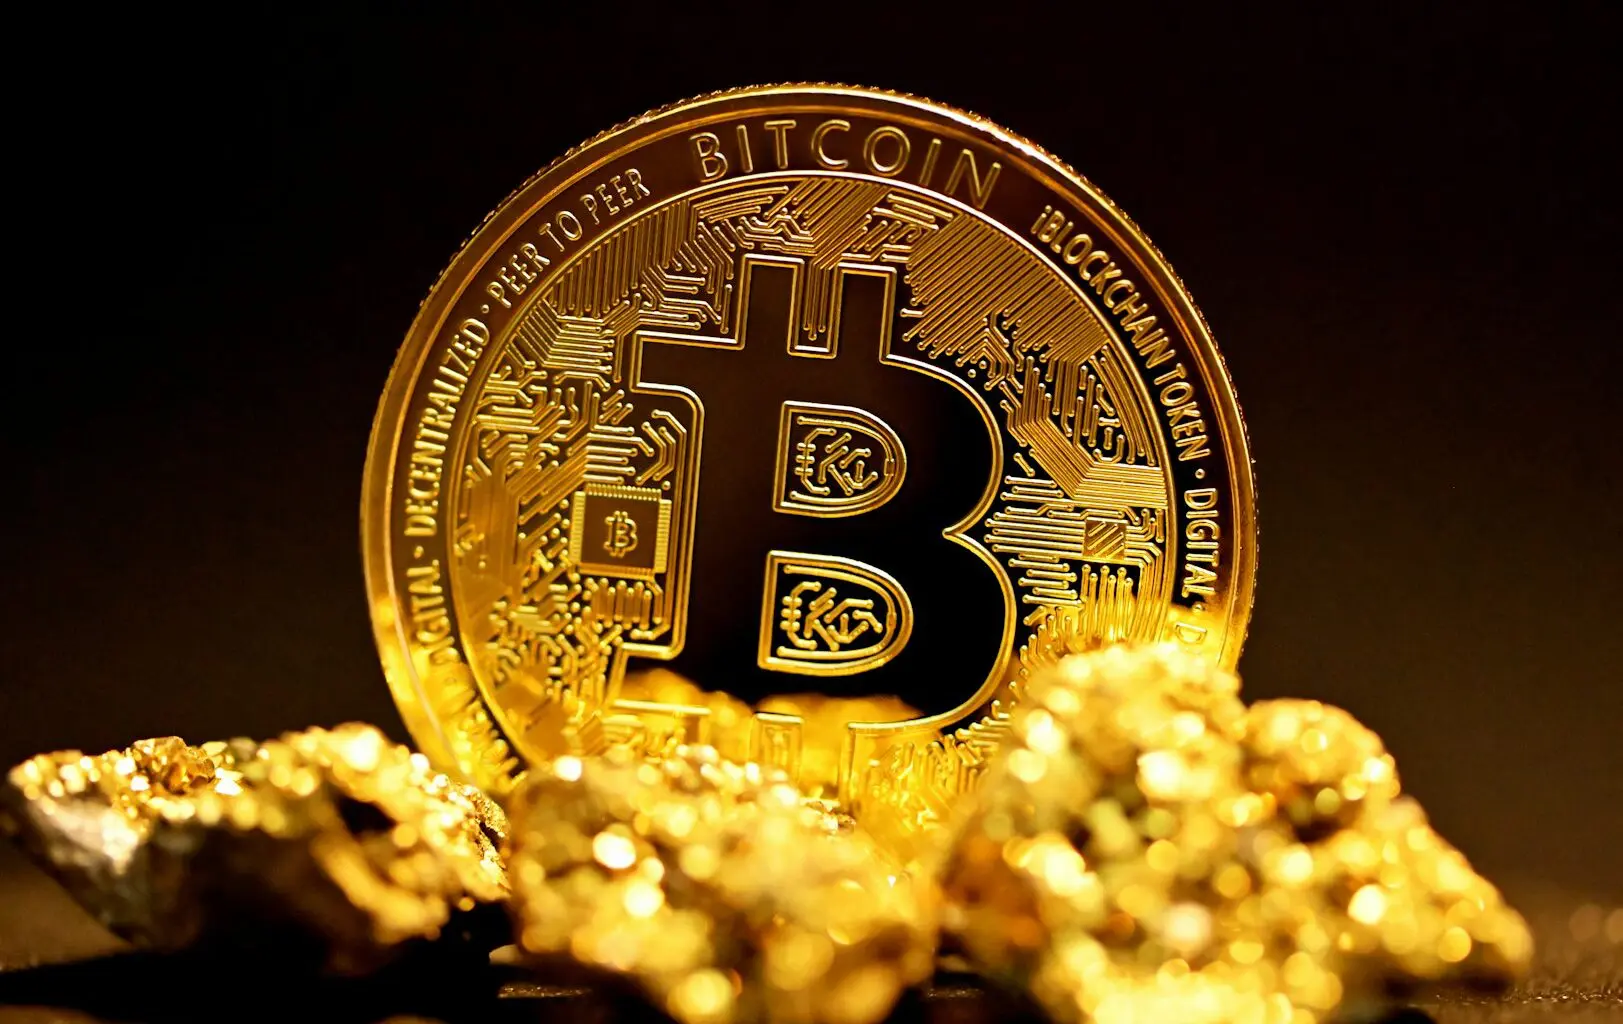 A circular gold coin with a stylized B in the center, representing the Bitcoin cryptocurrency.